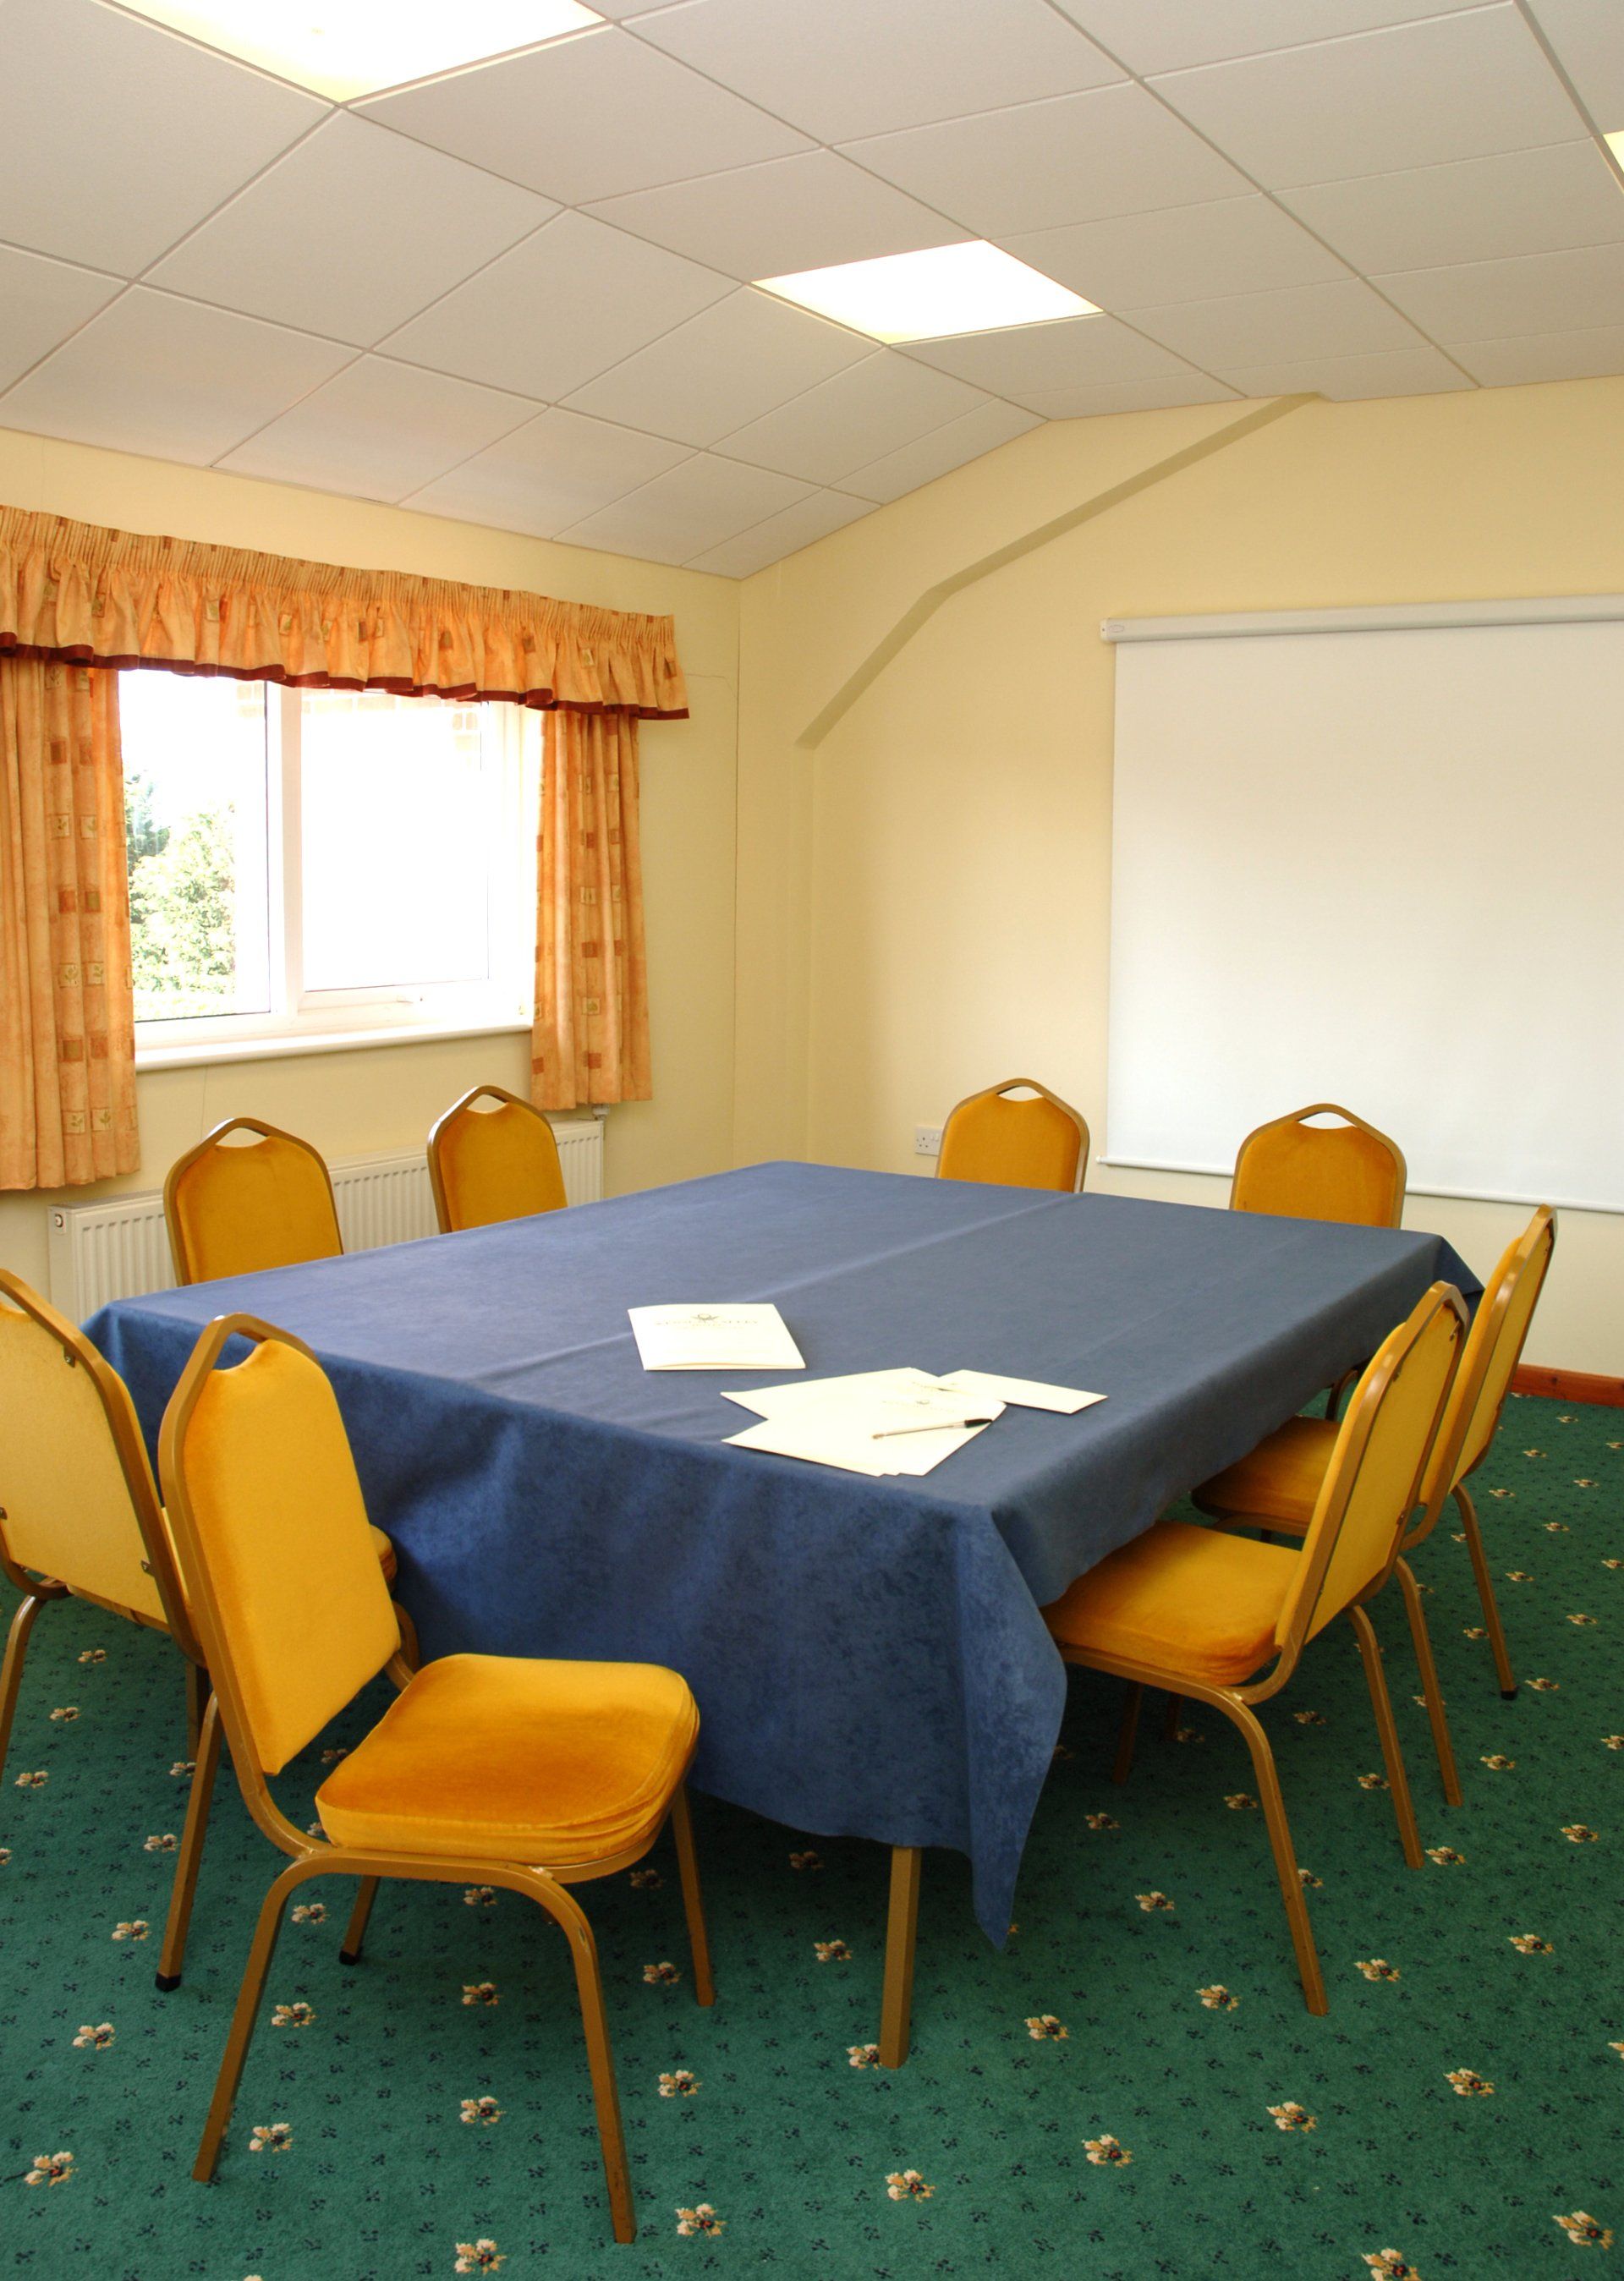 Meeting Room Hire Norwich